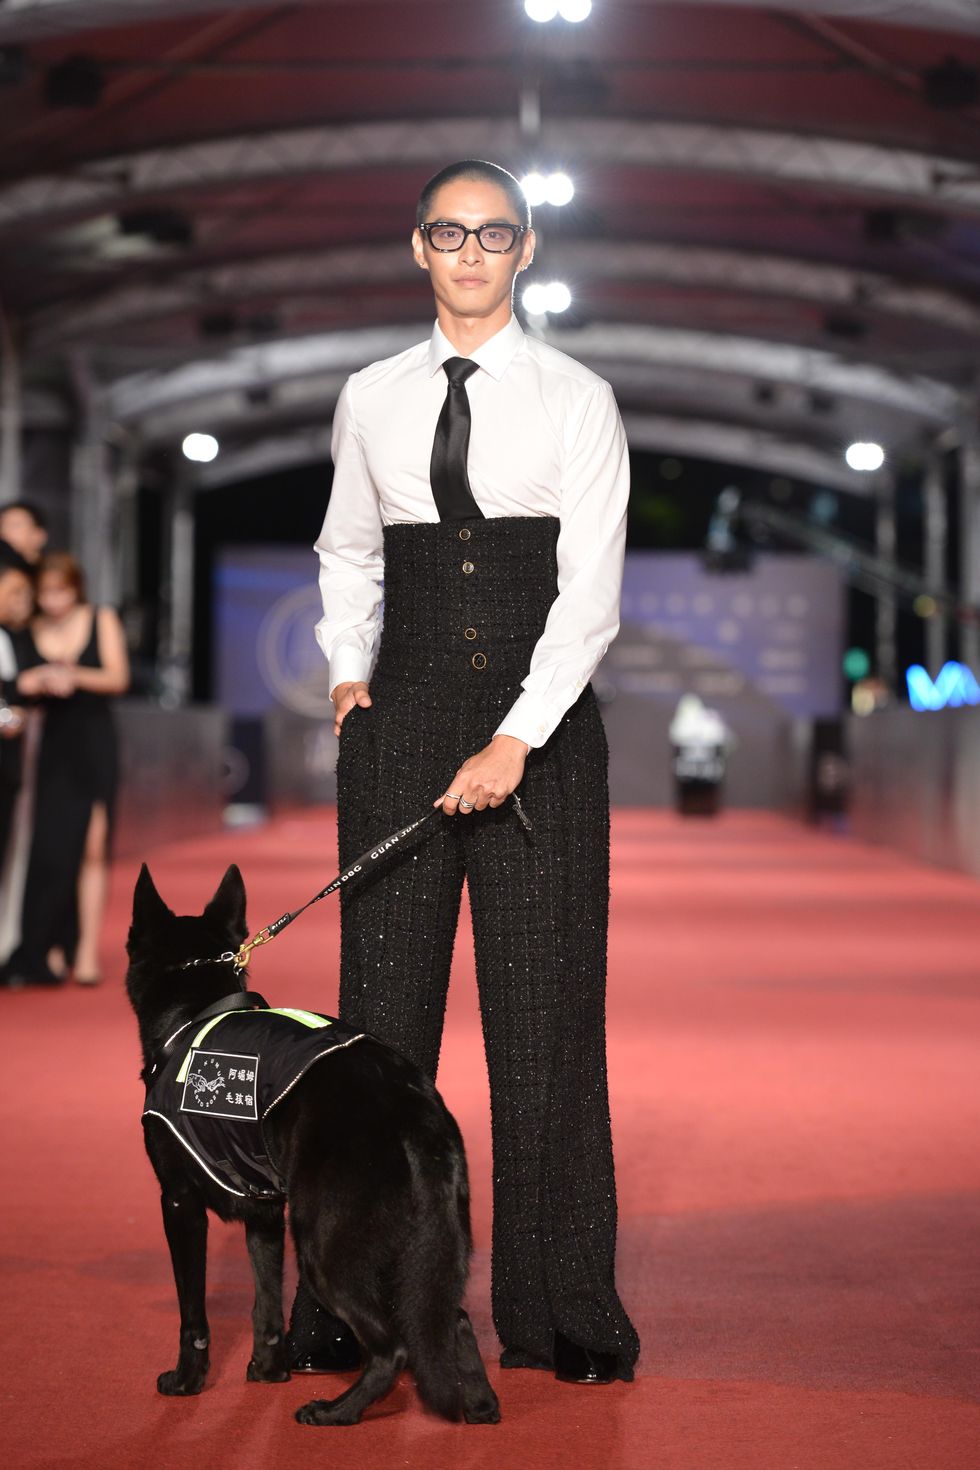 a person in a suit and tie walking a dog